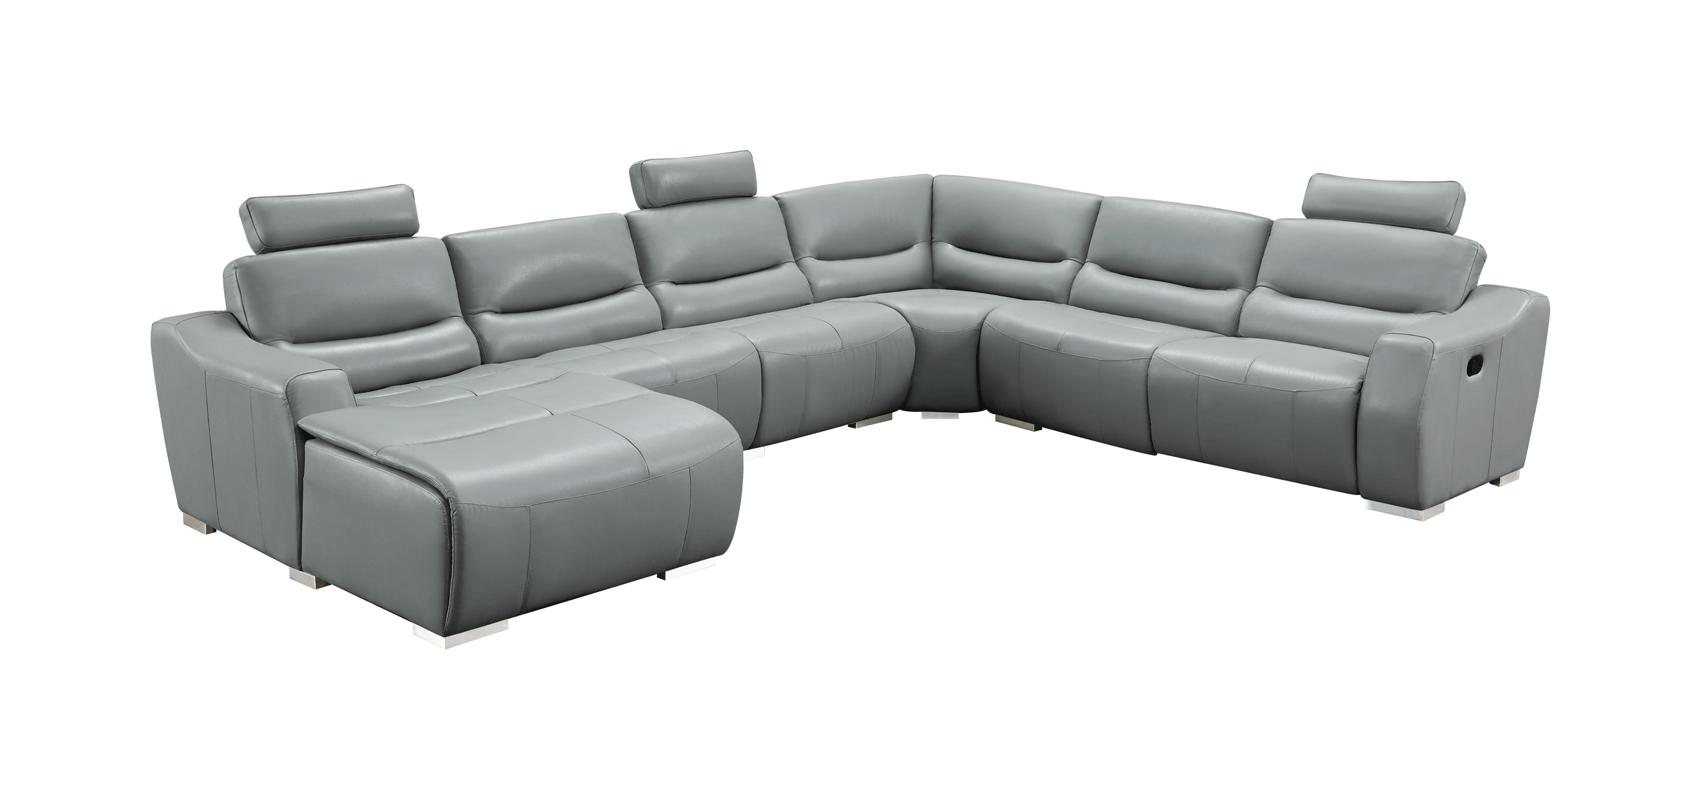 

    
ESF 2144 Sectional Reclining Sectional Gray 2144SECTIONALGREY LEFT
